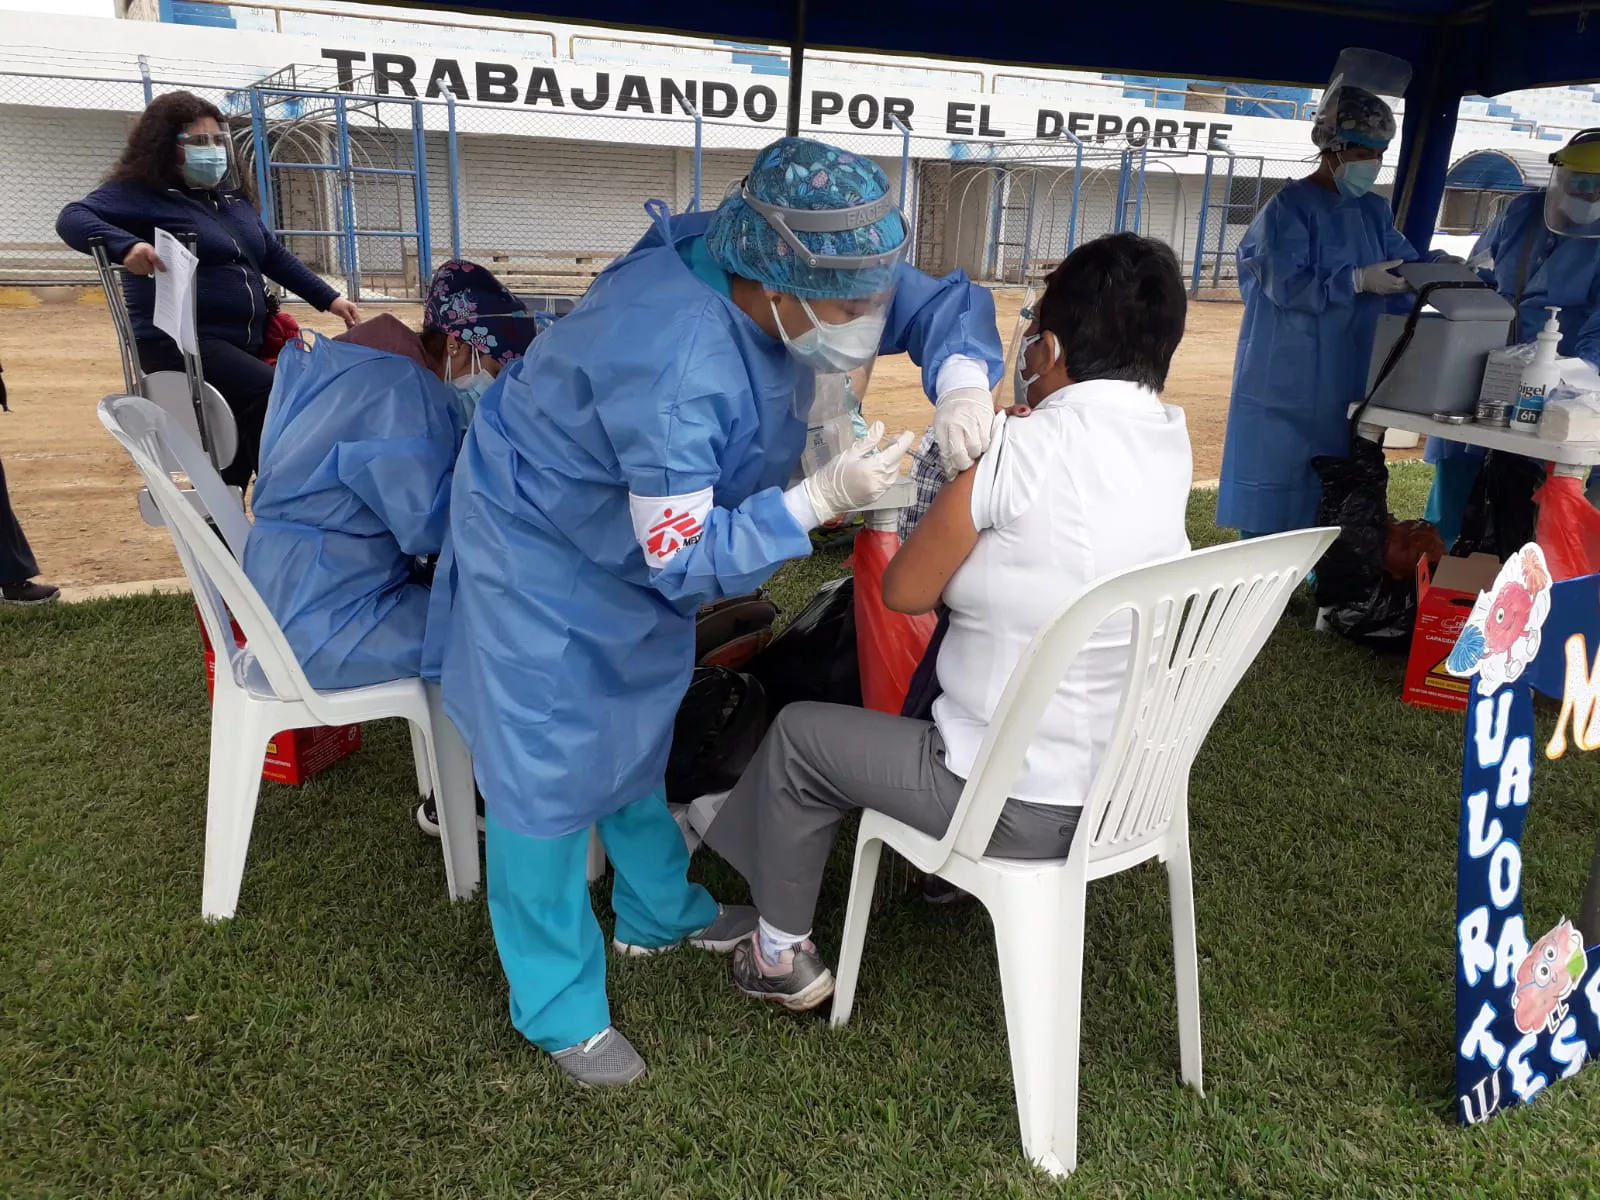 A new wave of COVID-19 has swept Peru since the start of 2021. MSF has launched an intervention in support of the health authorities in Huaura province, north of Lima, aimed at taking some pressure off the regional hospital in Huacho (the provincial capital) by treating patients who need isolation and oxygen therapy, but whose state is not as critical as to need the services of Huacho hospital.